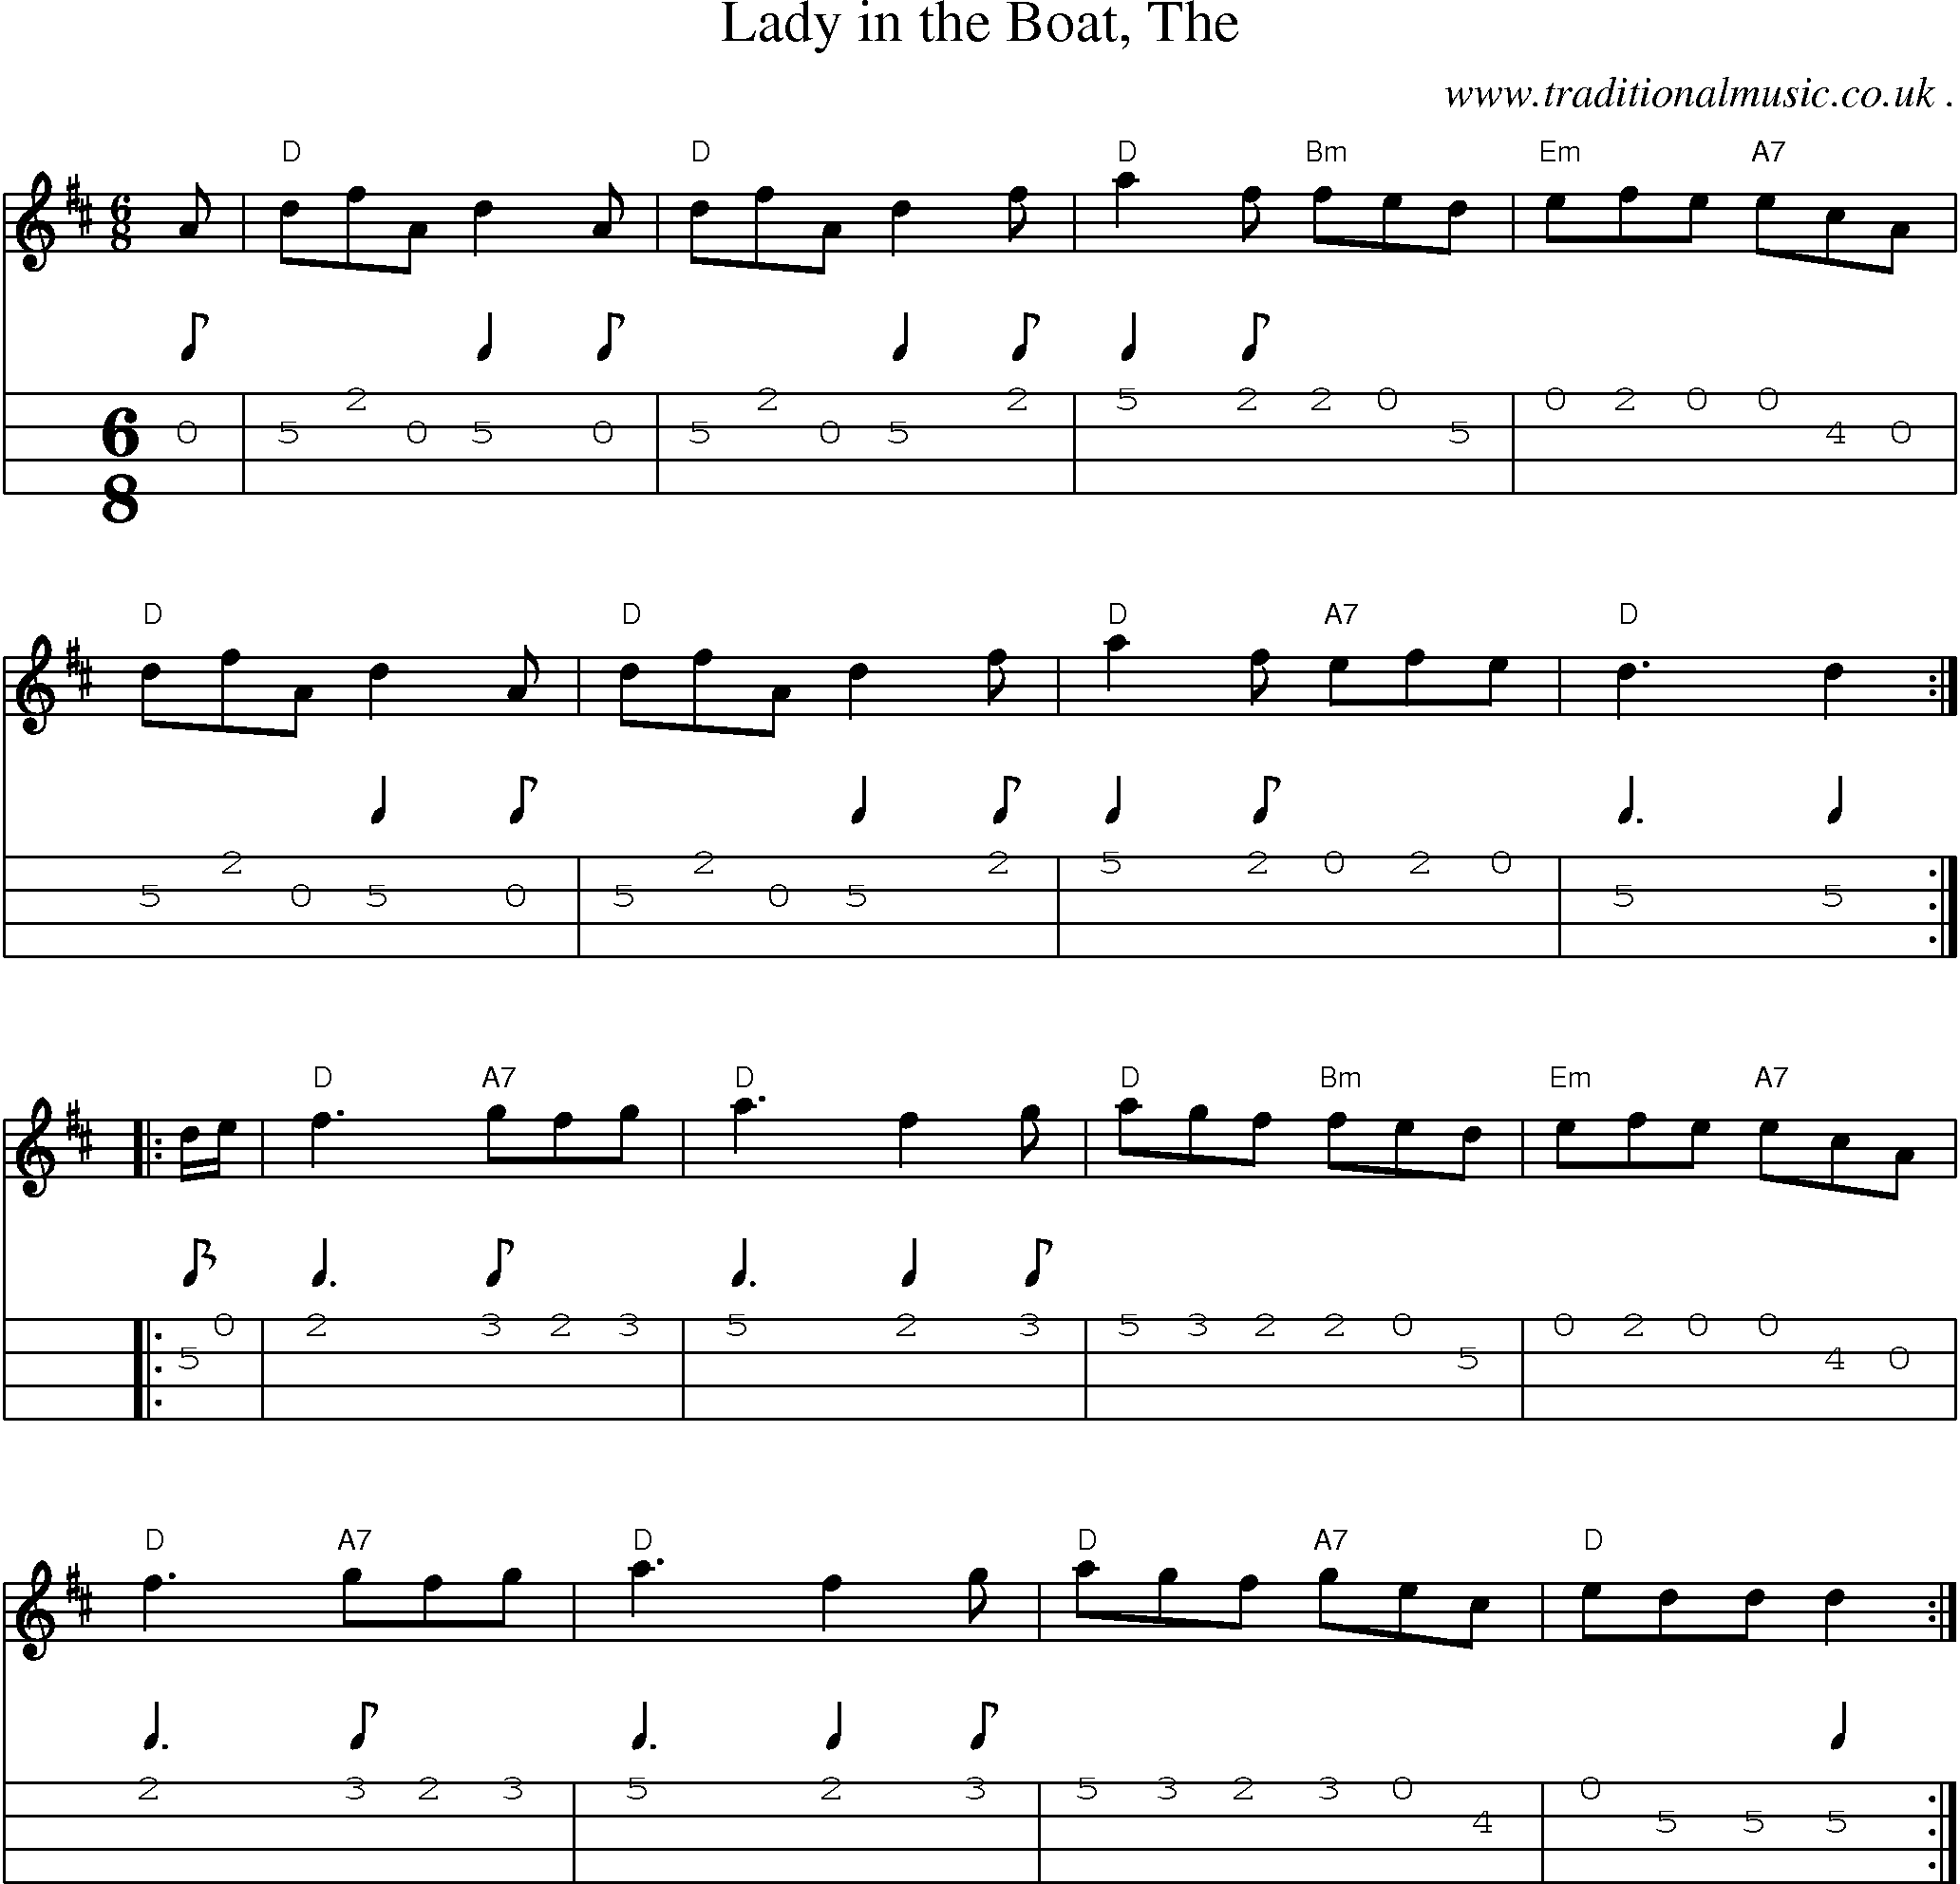 Music Score and Guitar Tabs for Lady in the Boat The